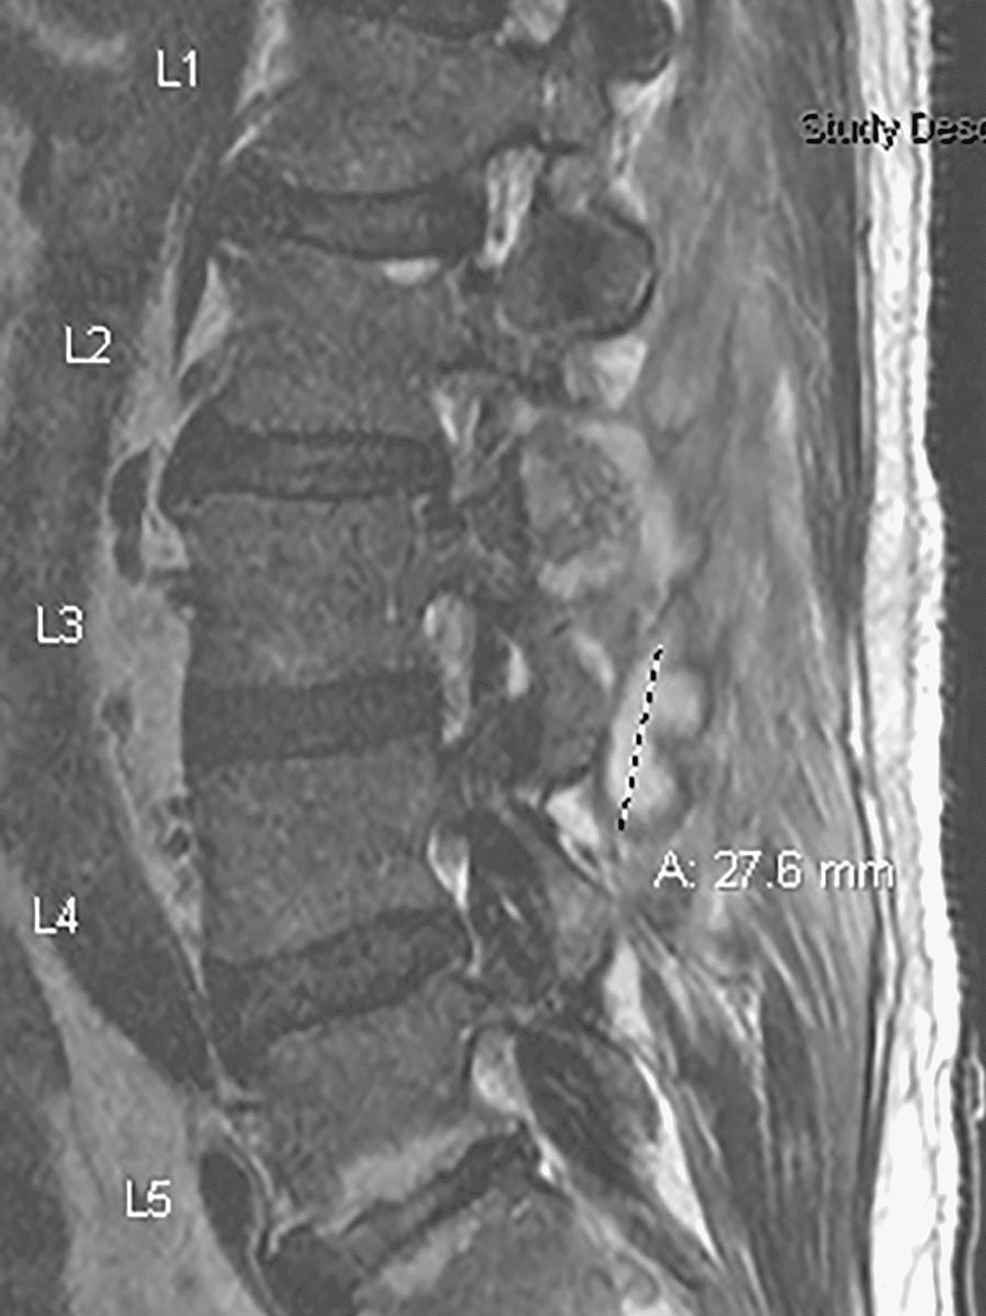 MRI-(SAG-T2-sequence)-showing-peripherally-enhancing-abscess-spanning-the-approximate-upper/mid-L3-vertebral-body-level-to-the-superior-L4-vertebral-body-level,-located-within-the-left-posterior-epidural-space-of-the-spinal-canal